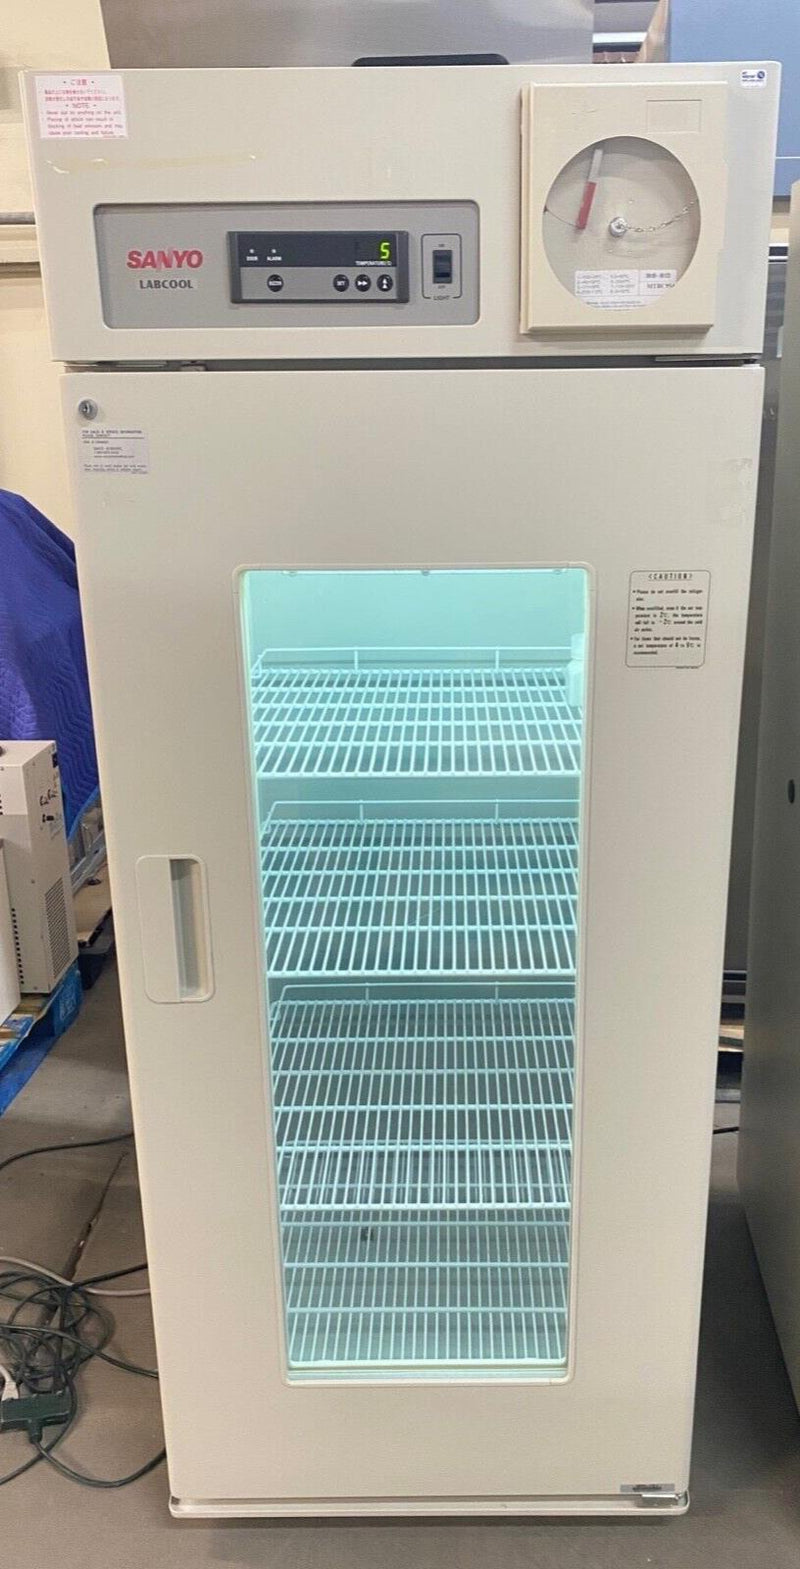 Sanyo MPR-721 Biomedical / Pharmaceutical Lab Refrigerator with Glass Door